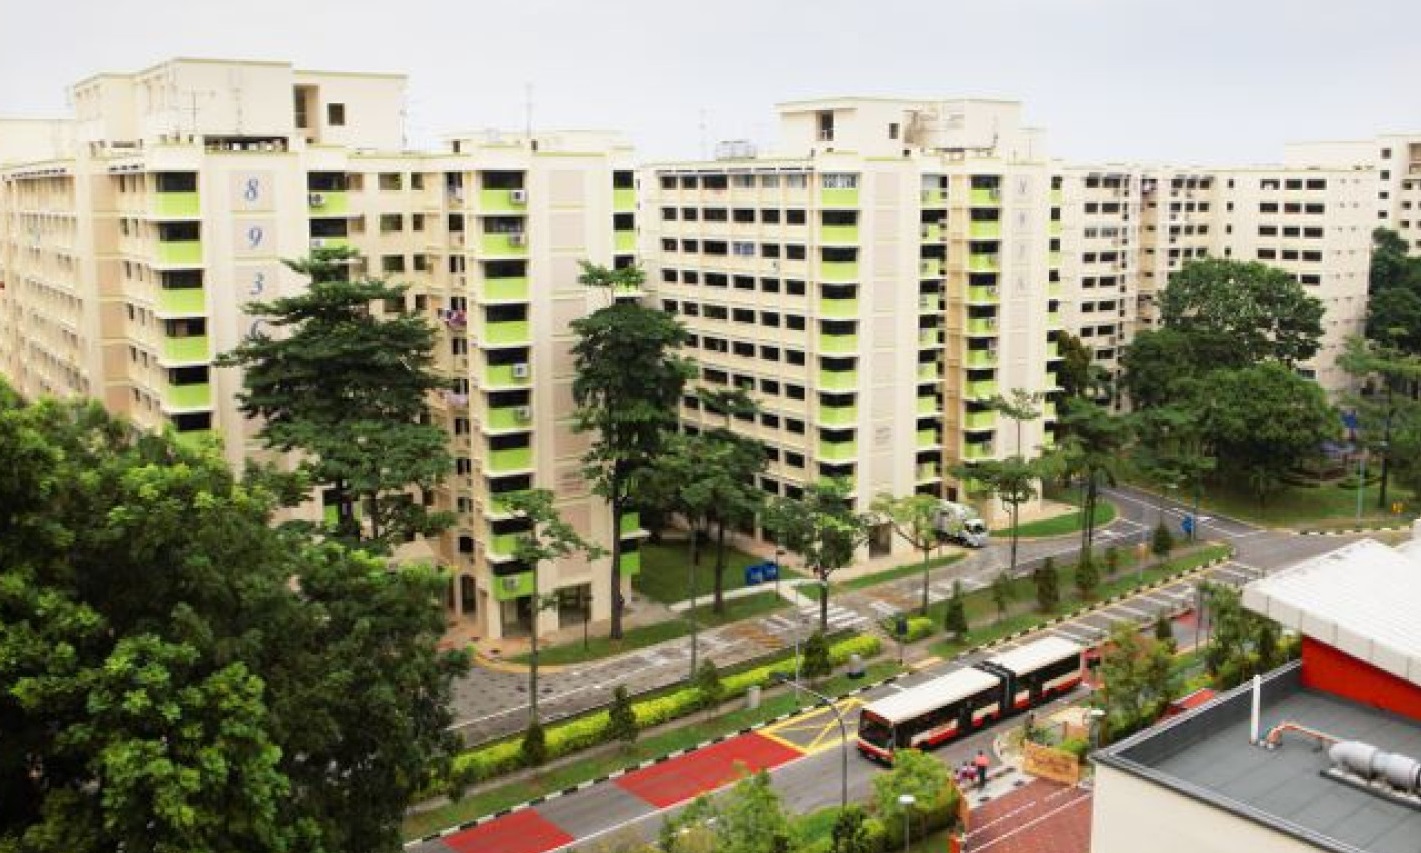 Woodlands large HDB apartments for less than $500 per square foot